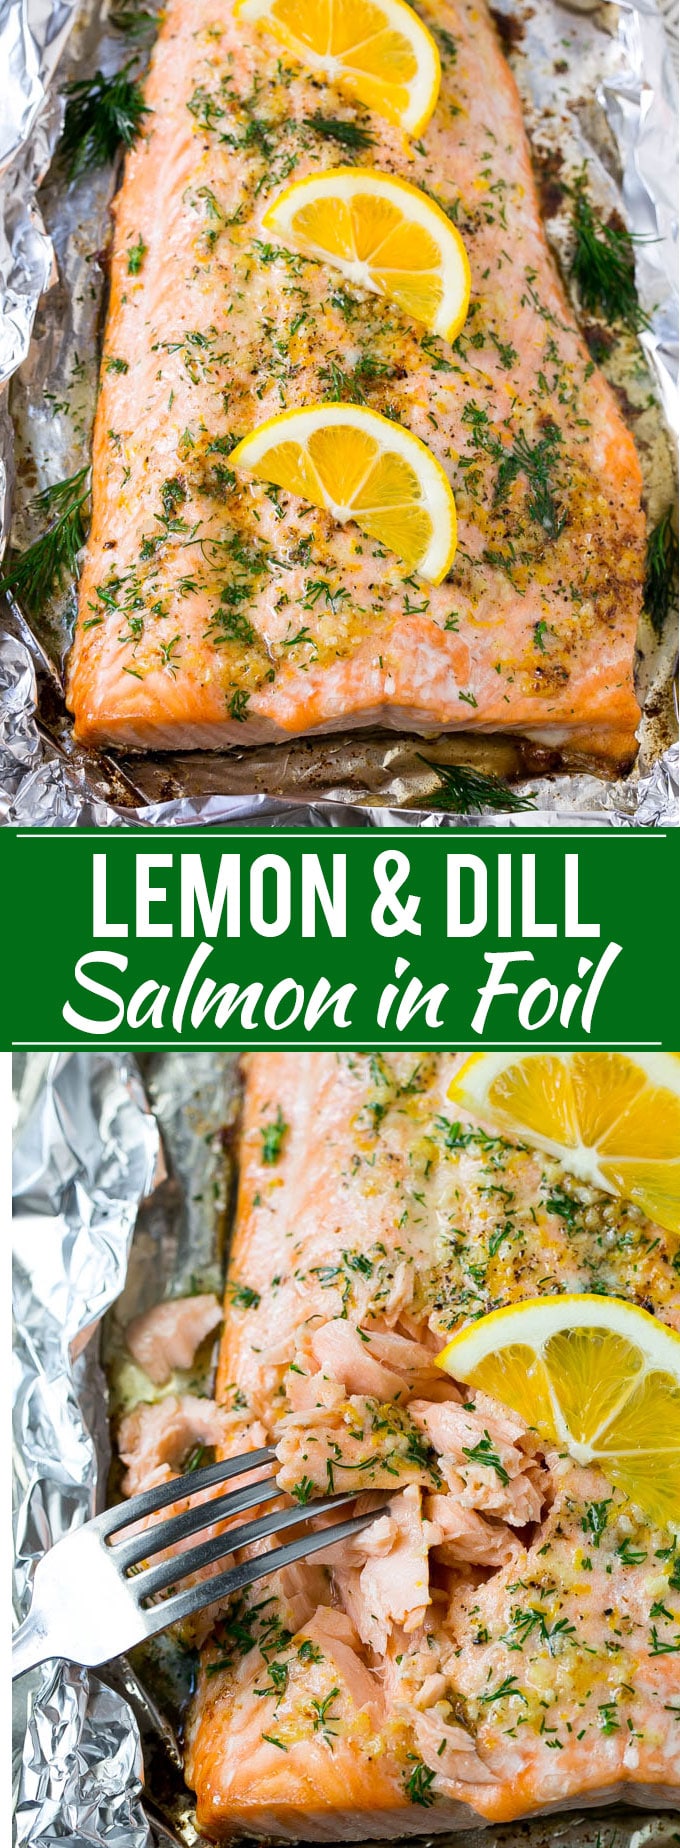 Salmon in Foil with Lemon and Dill Recipe | Foil Wrapped Salmon | Baked Salmon | Easy Salmon Recipe | Lemon and Dill Salmon #salmon #fish #seafood #lemon #lowcarb #keto #dinner #dinneratthezoo